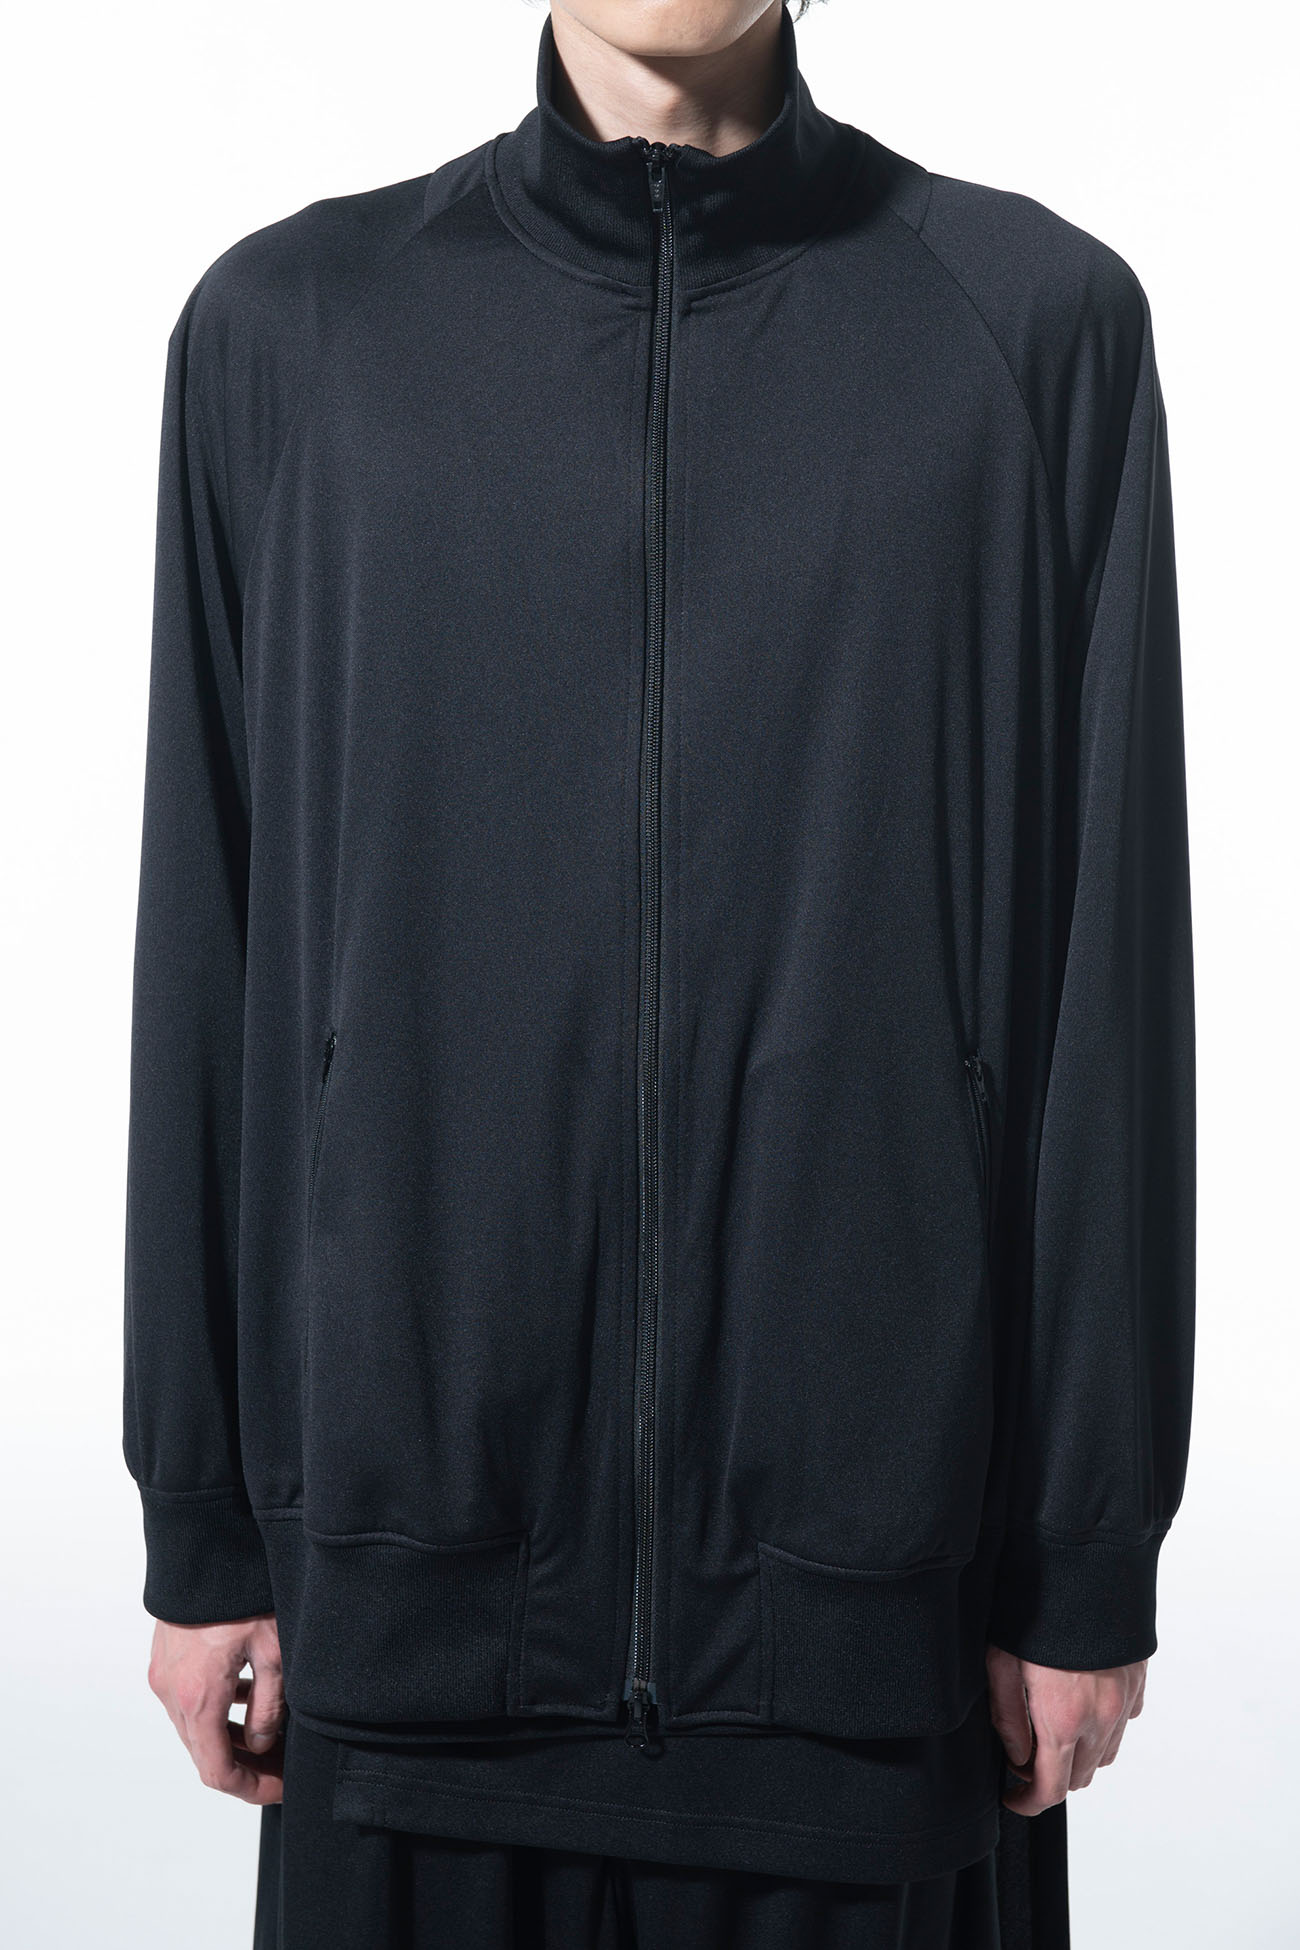 Thin Smooth Jersey Long Tail Track Jacket